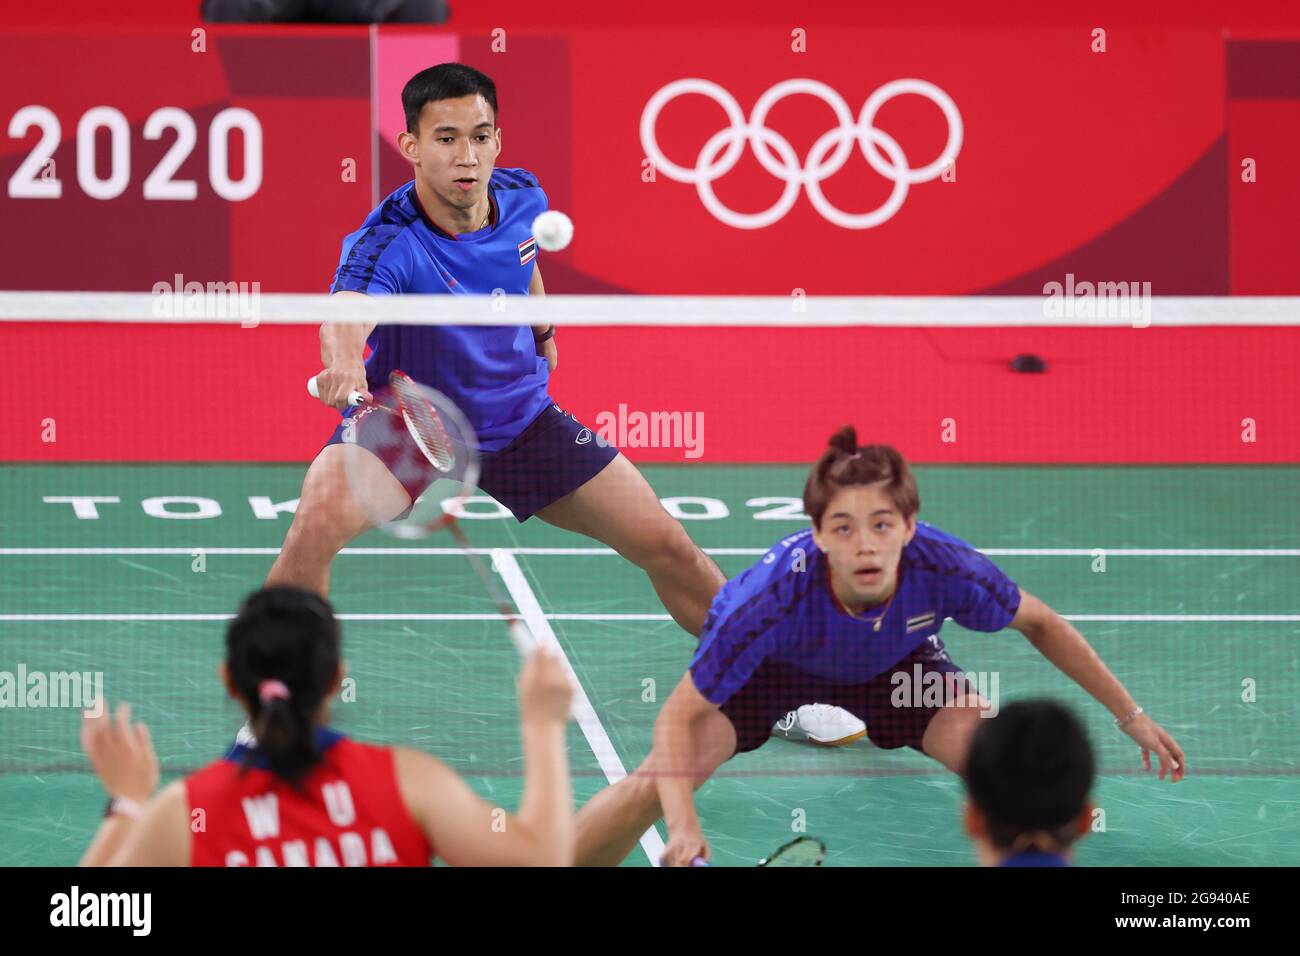 Tokyo, Japan. 24th July, 2021. (L-R) PUAVARANUKROH Dechapol, TAERATTANACHAI  Sapsiree (THA) Badminton: Mixed Doubles Group Play Stage - Group B during  the Tokyo 2020 Olympic Games at the Musashino Forest Sport Plaza